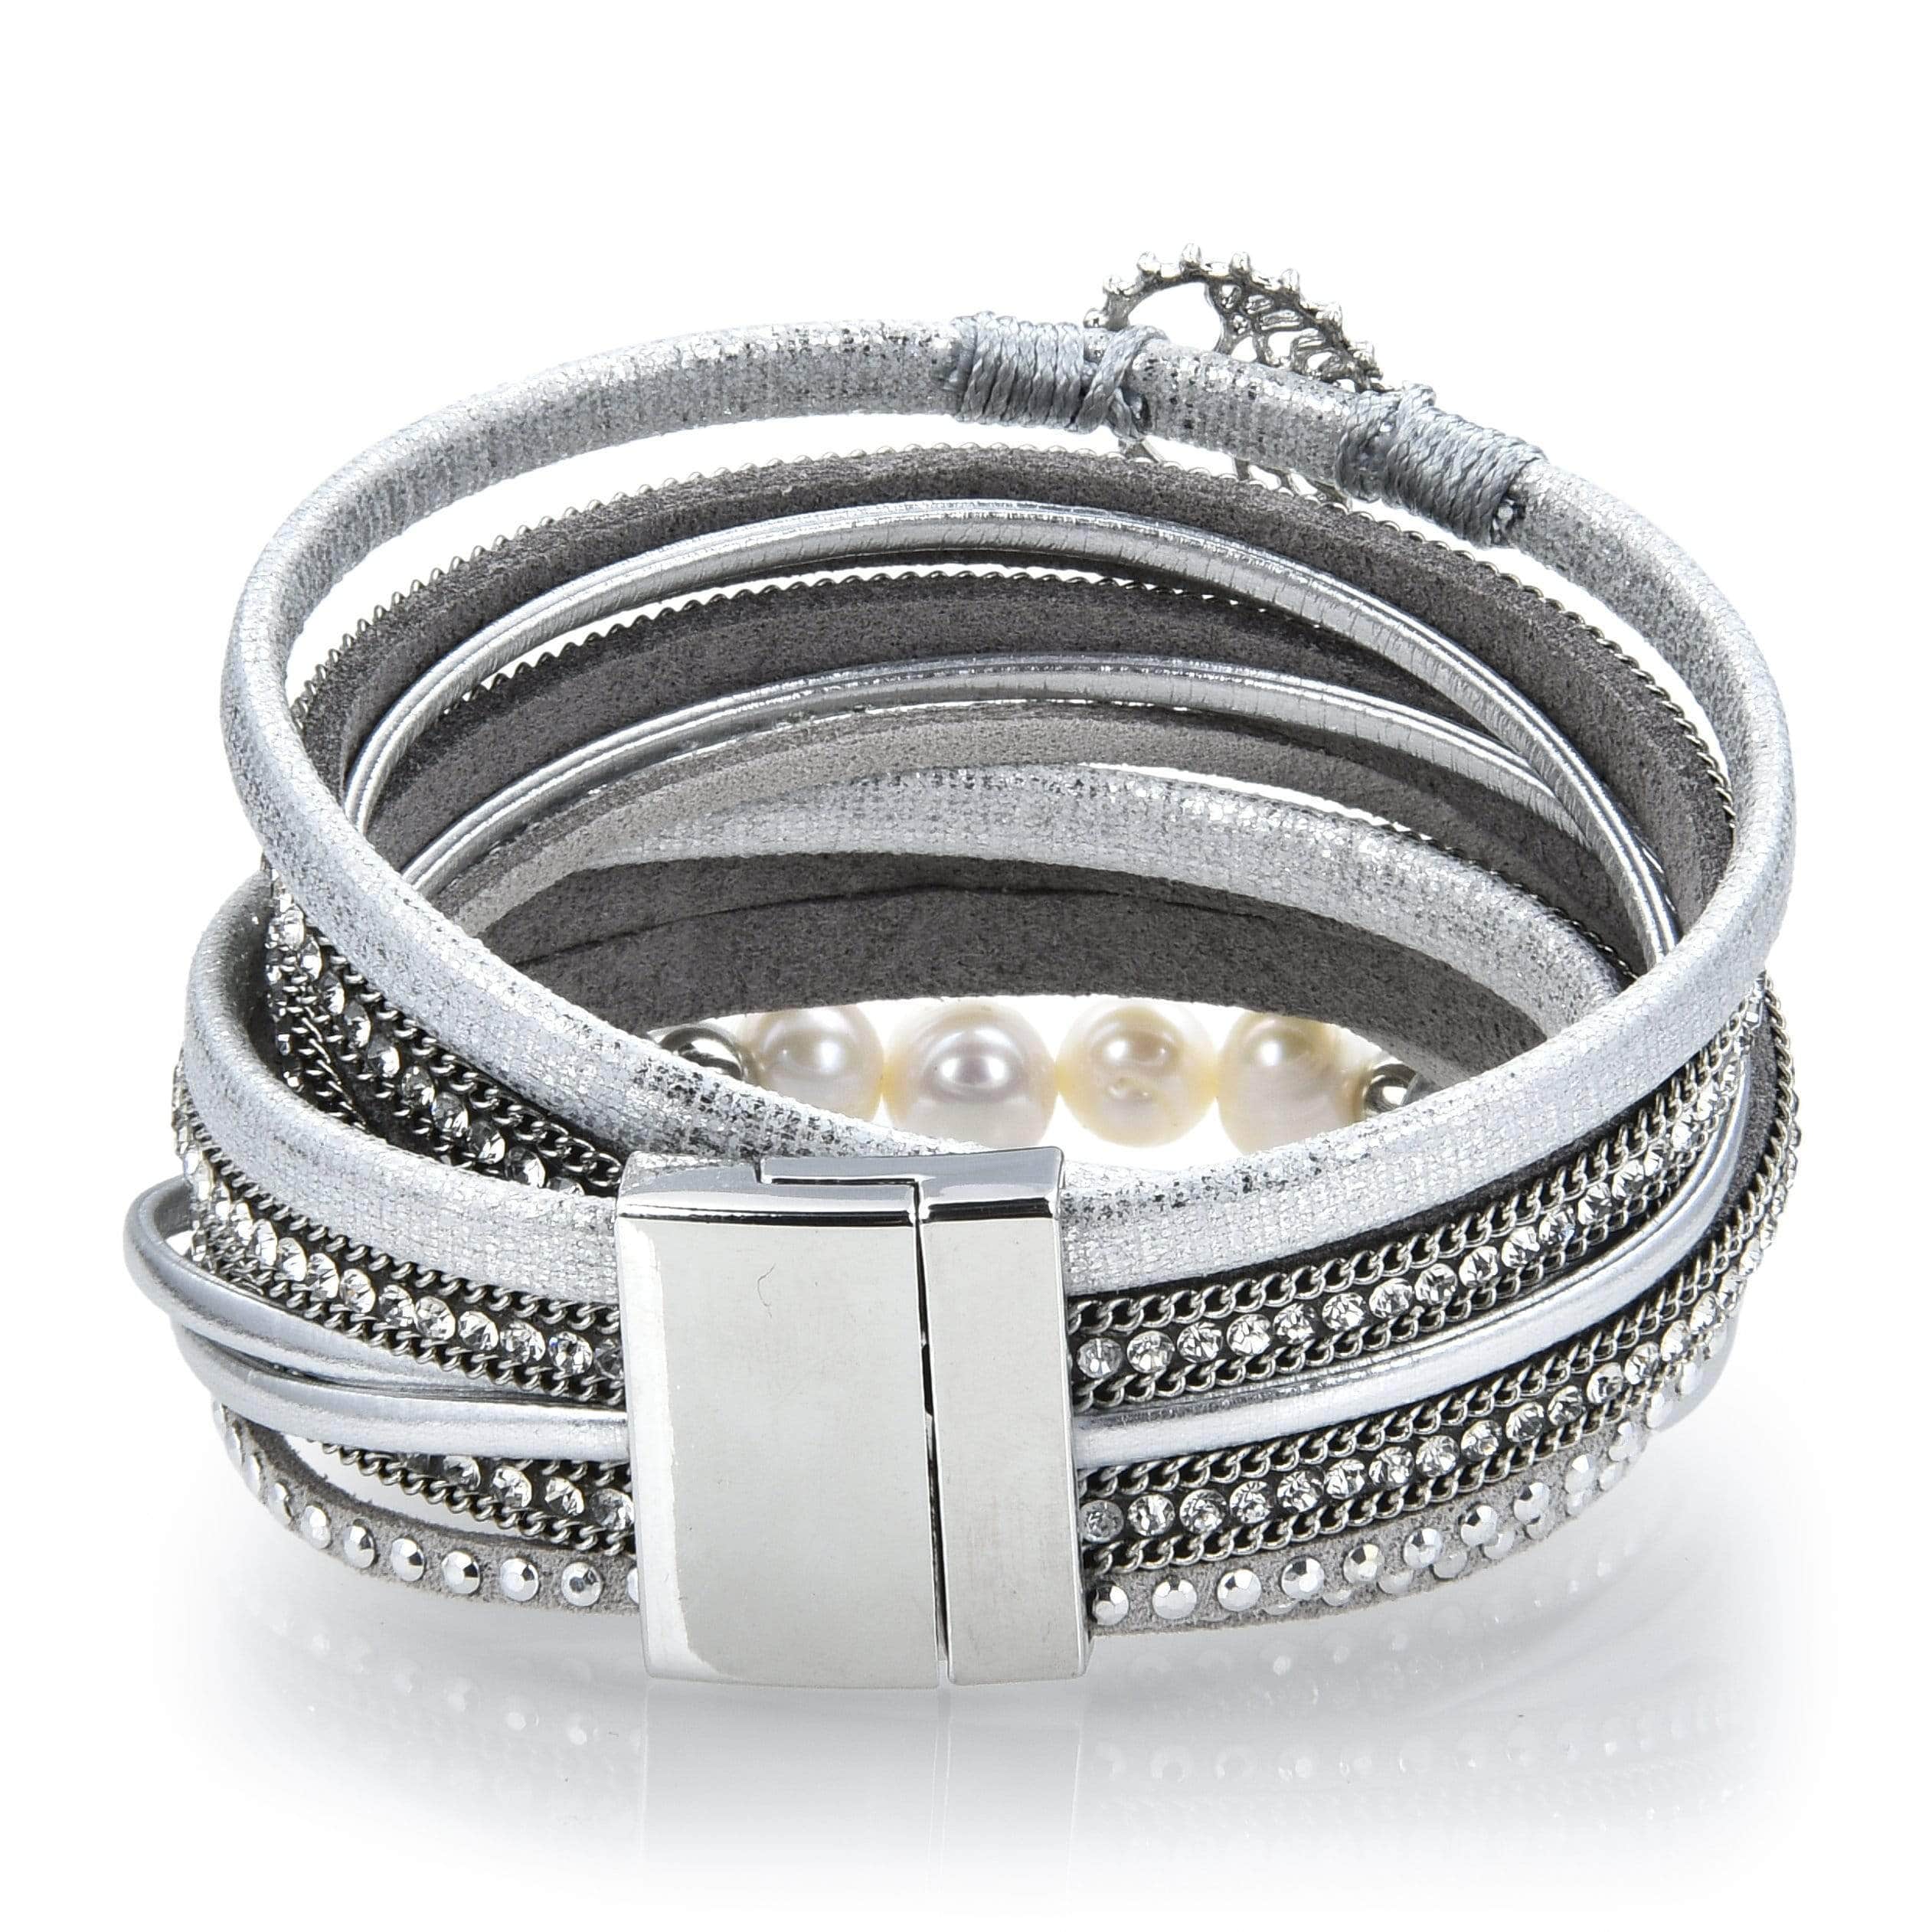 Kalifano Multiwrap Bracelets Multiple Strand Bracelet with Tree of Life Design Silver With Magnetic Clasp BMW-25-SR